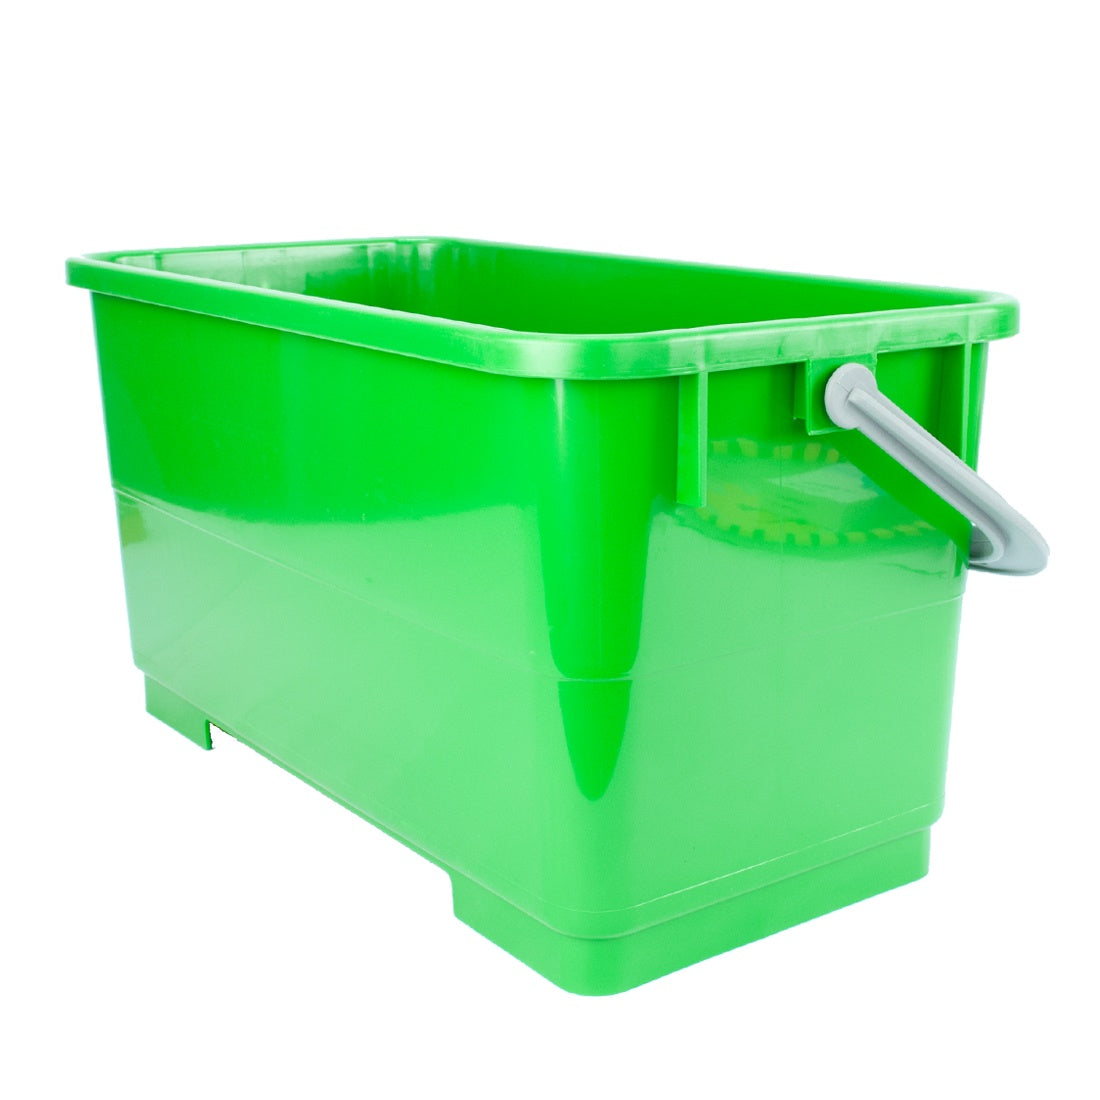 Green 6 Gallon Pulex Bucket with Grey Handle Right Angle View